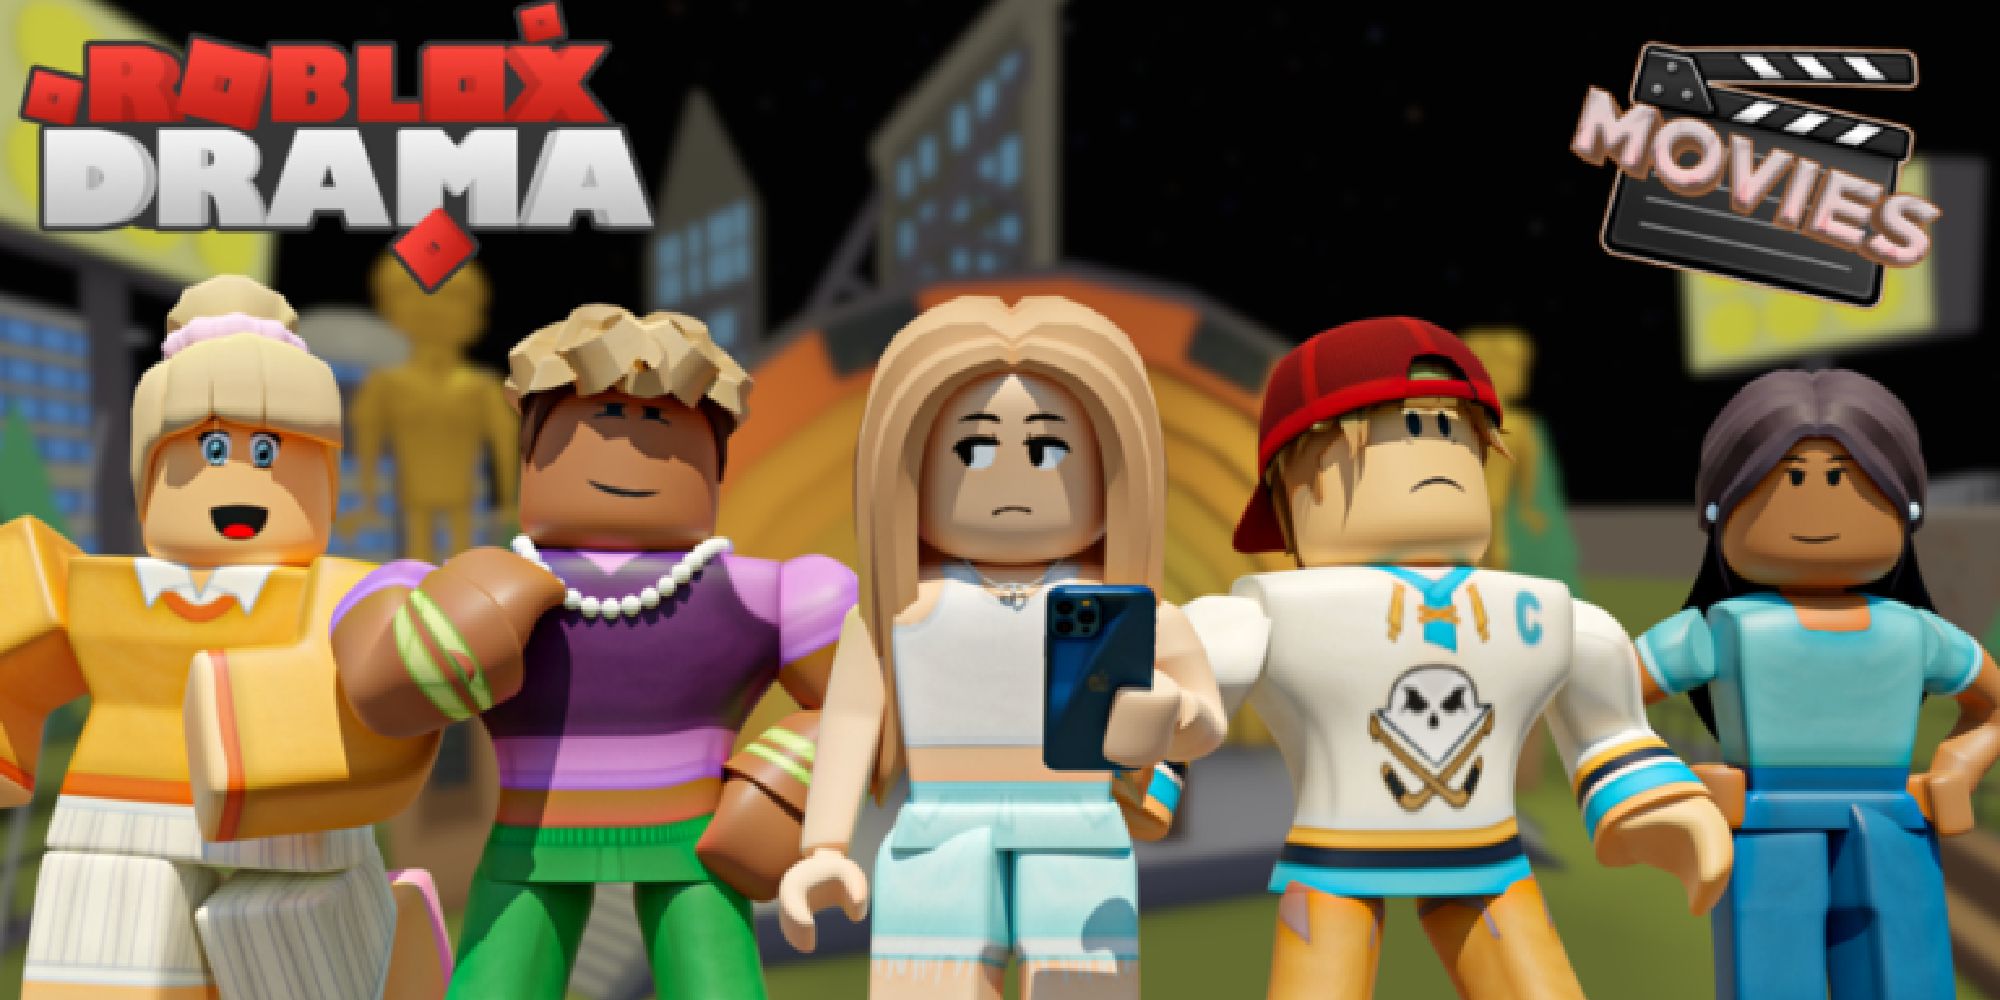 total roblox drama promotional image